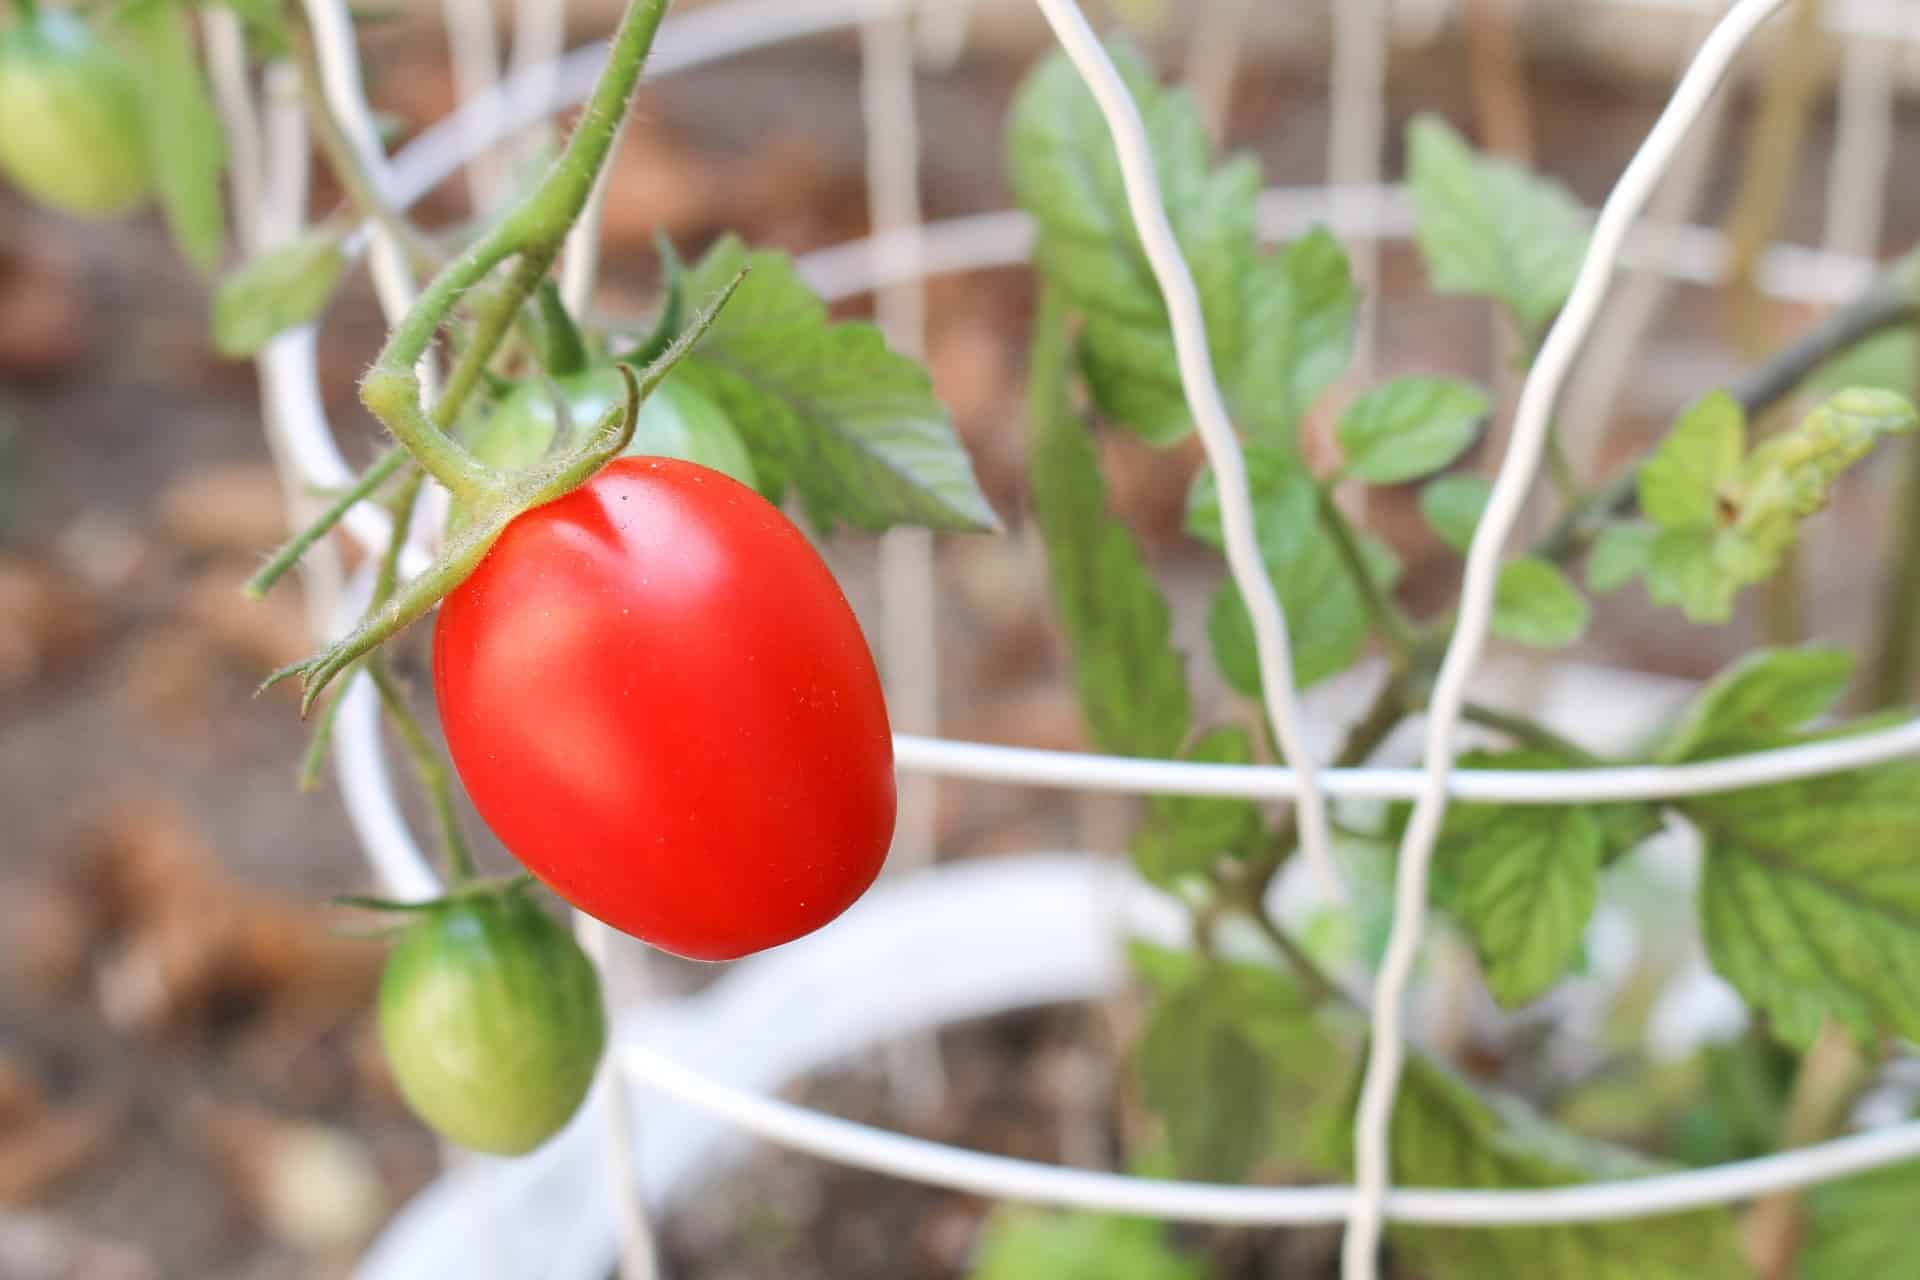 A tomato support holding a tomato plant.